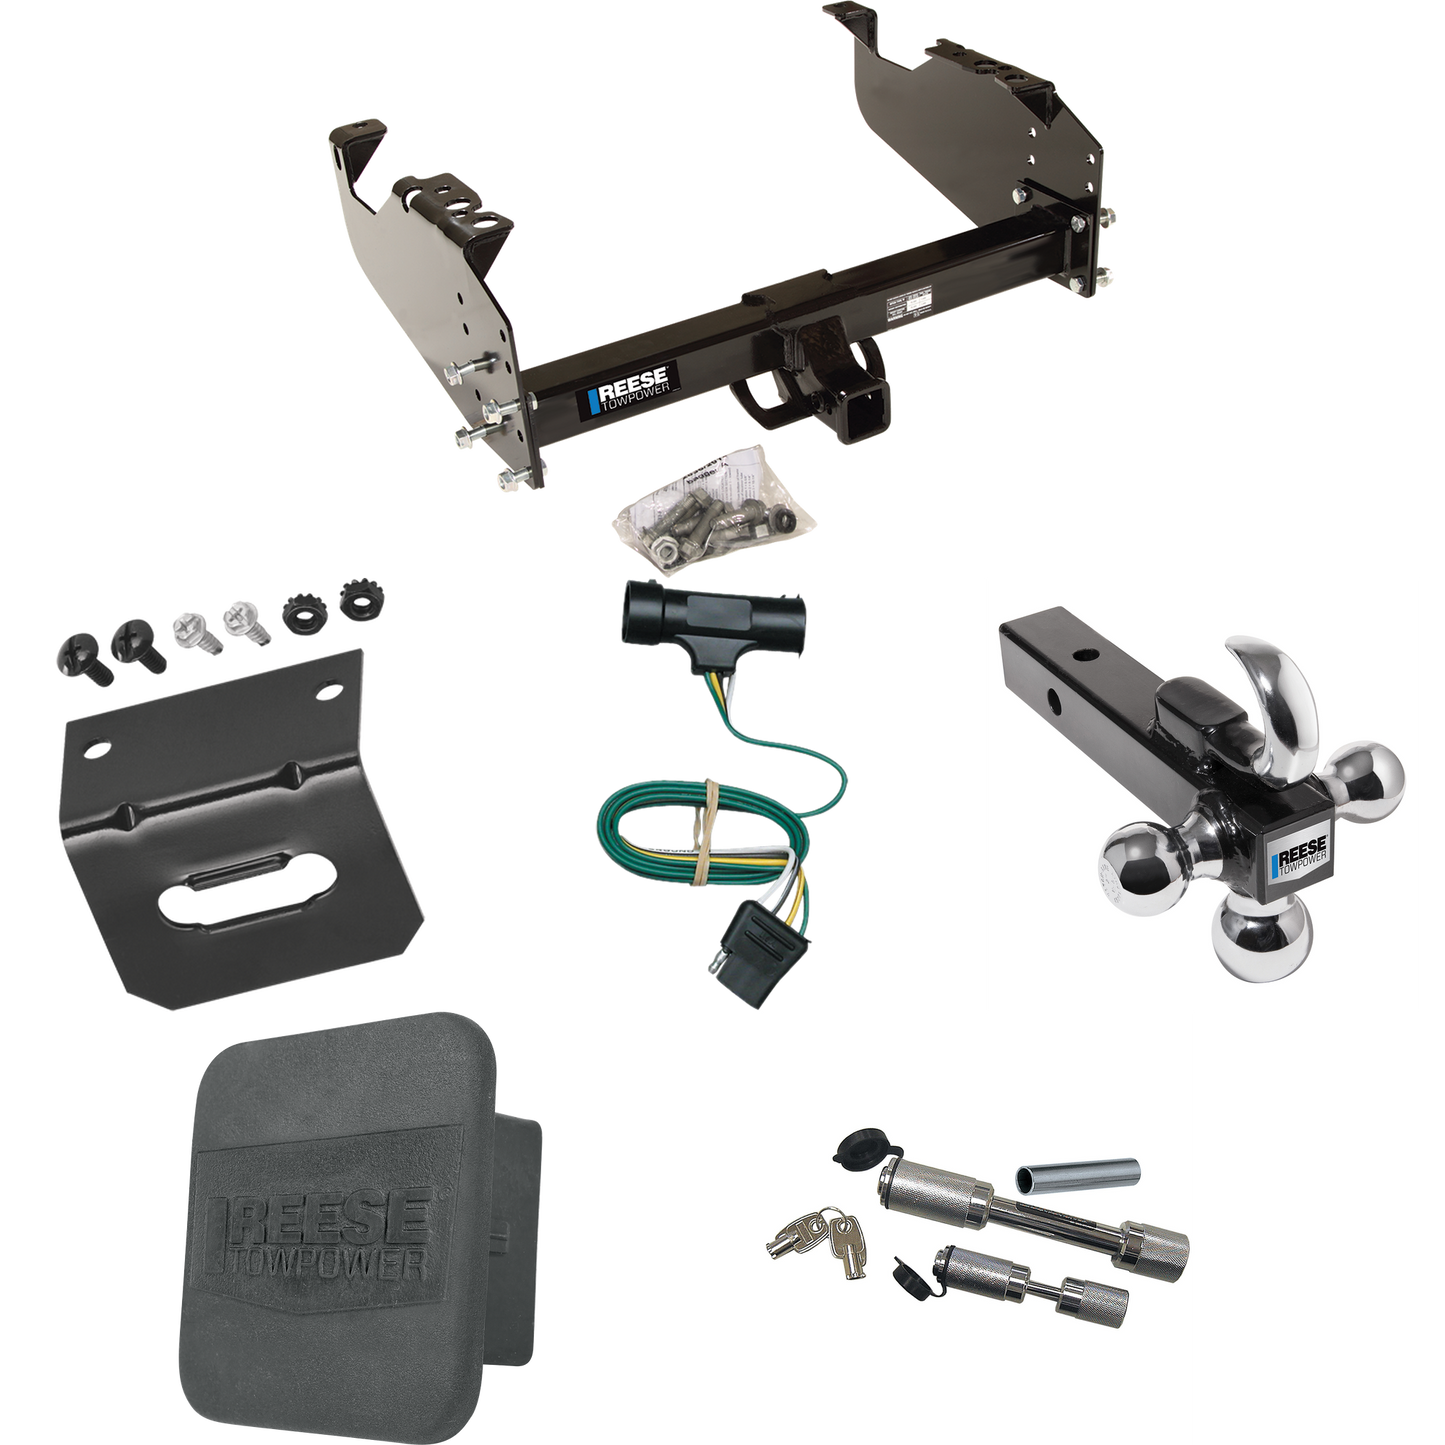 Fits 1975-1978 GMC K15 Trailer Hitch Tow PKG w/ 4-Flat Wiring Harness + Triple Ball Ball Mount 1-7/8" & 2" & 2-5/16" Trailer Balls w/ Tow Hook + Dual Hitch & Coupler Locks + Hitch Cover + Wiring Bracket By Reese Towpower